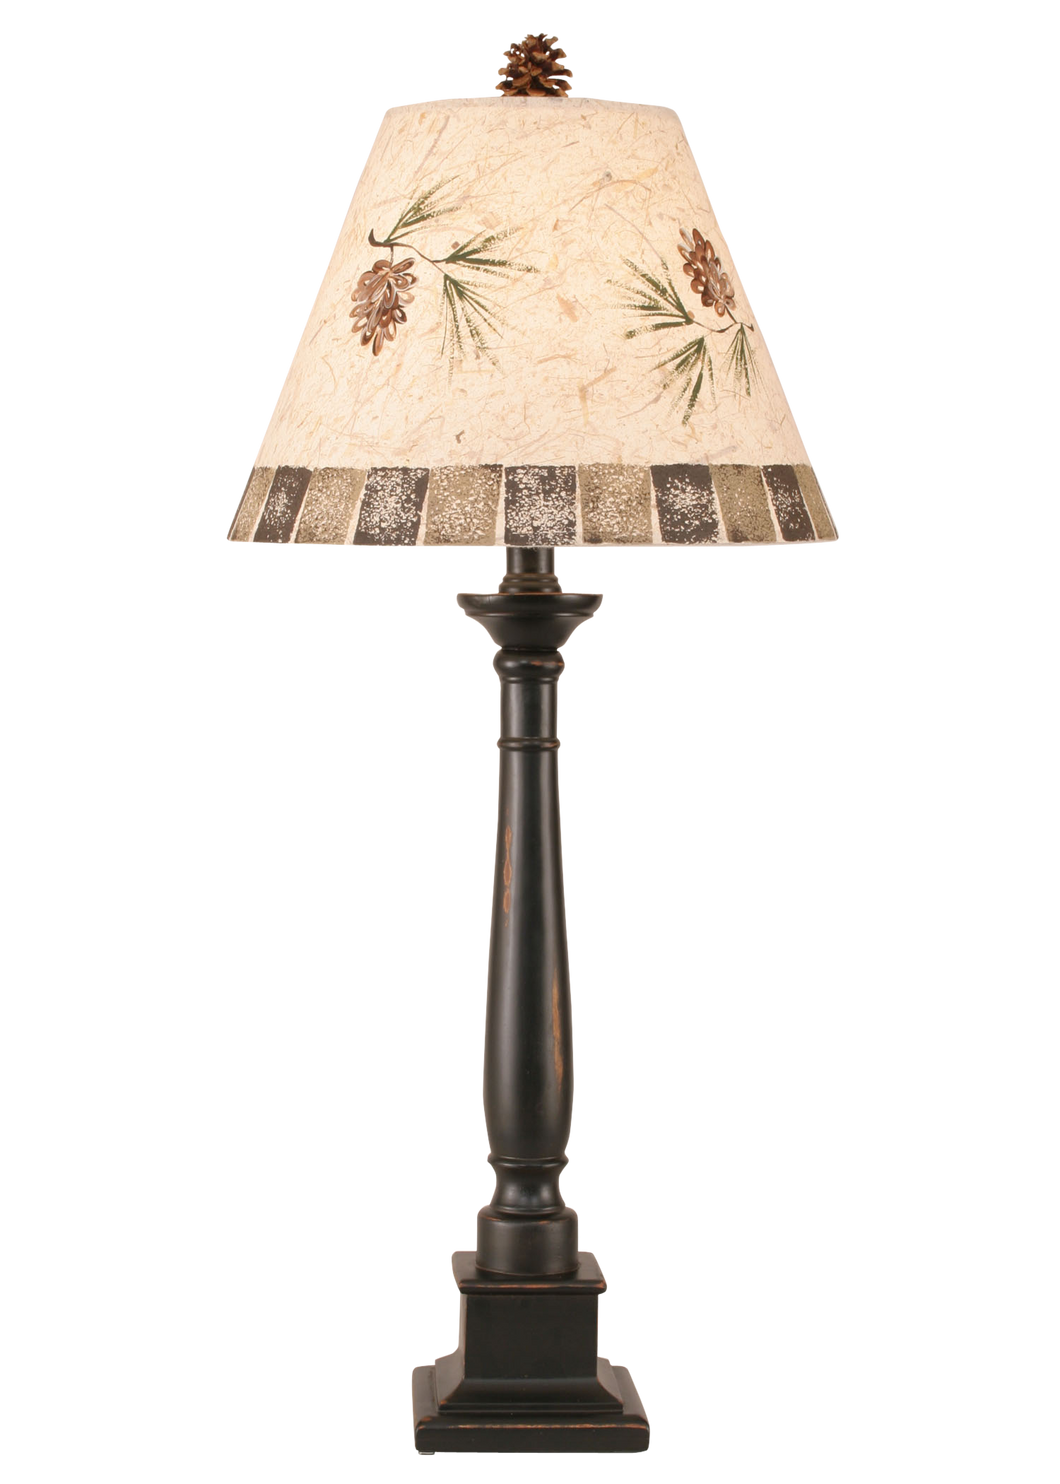 Distressed Black Square Candlestick Table Lamp w/ Pine Cone Shade